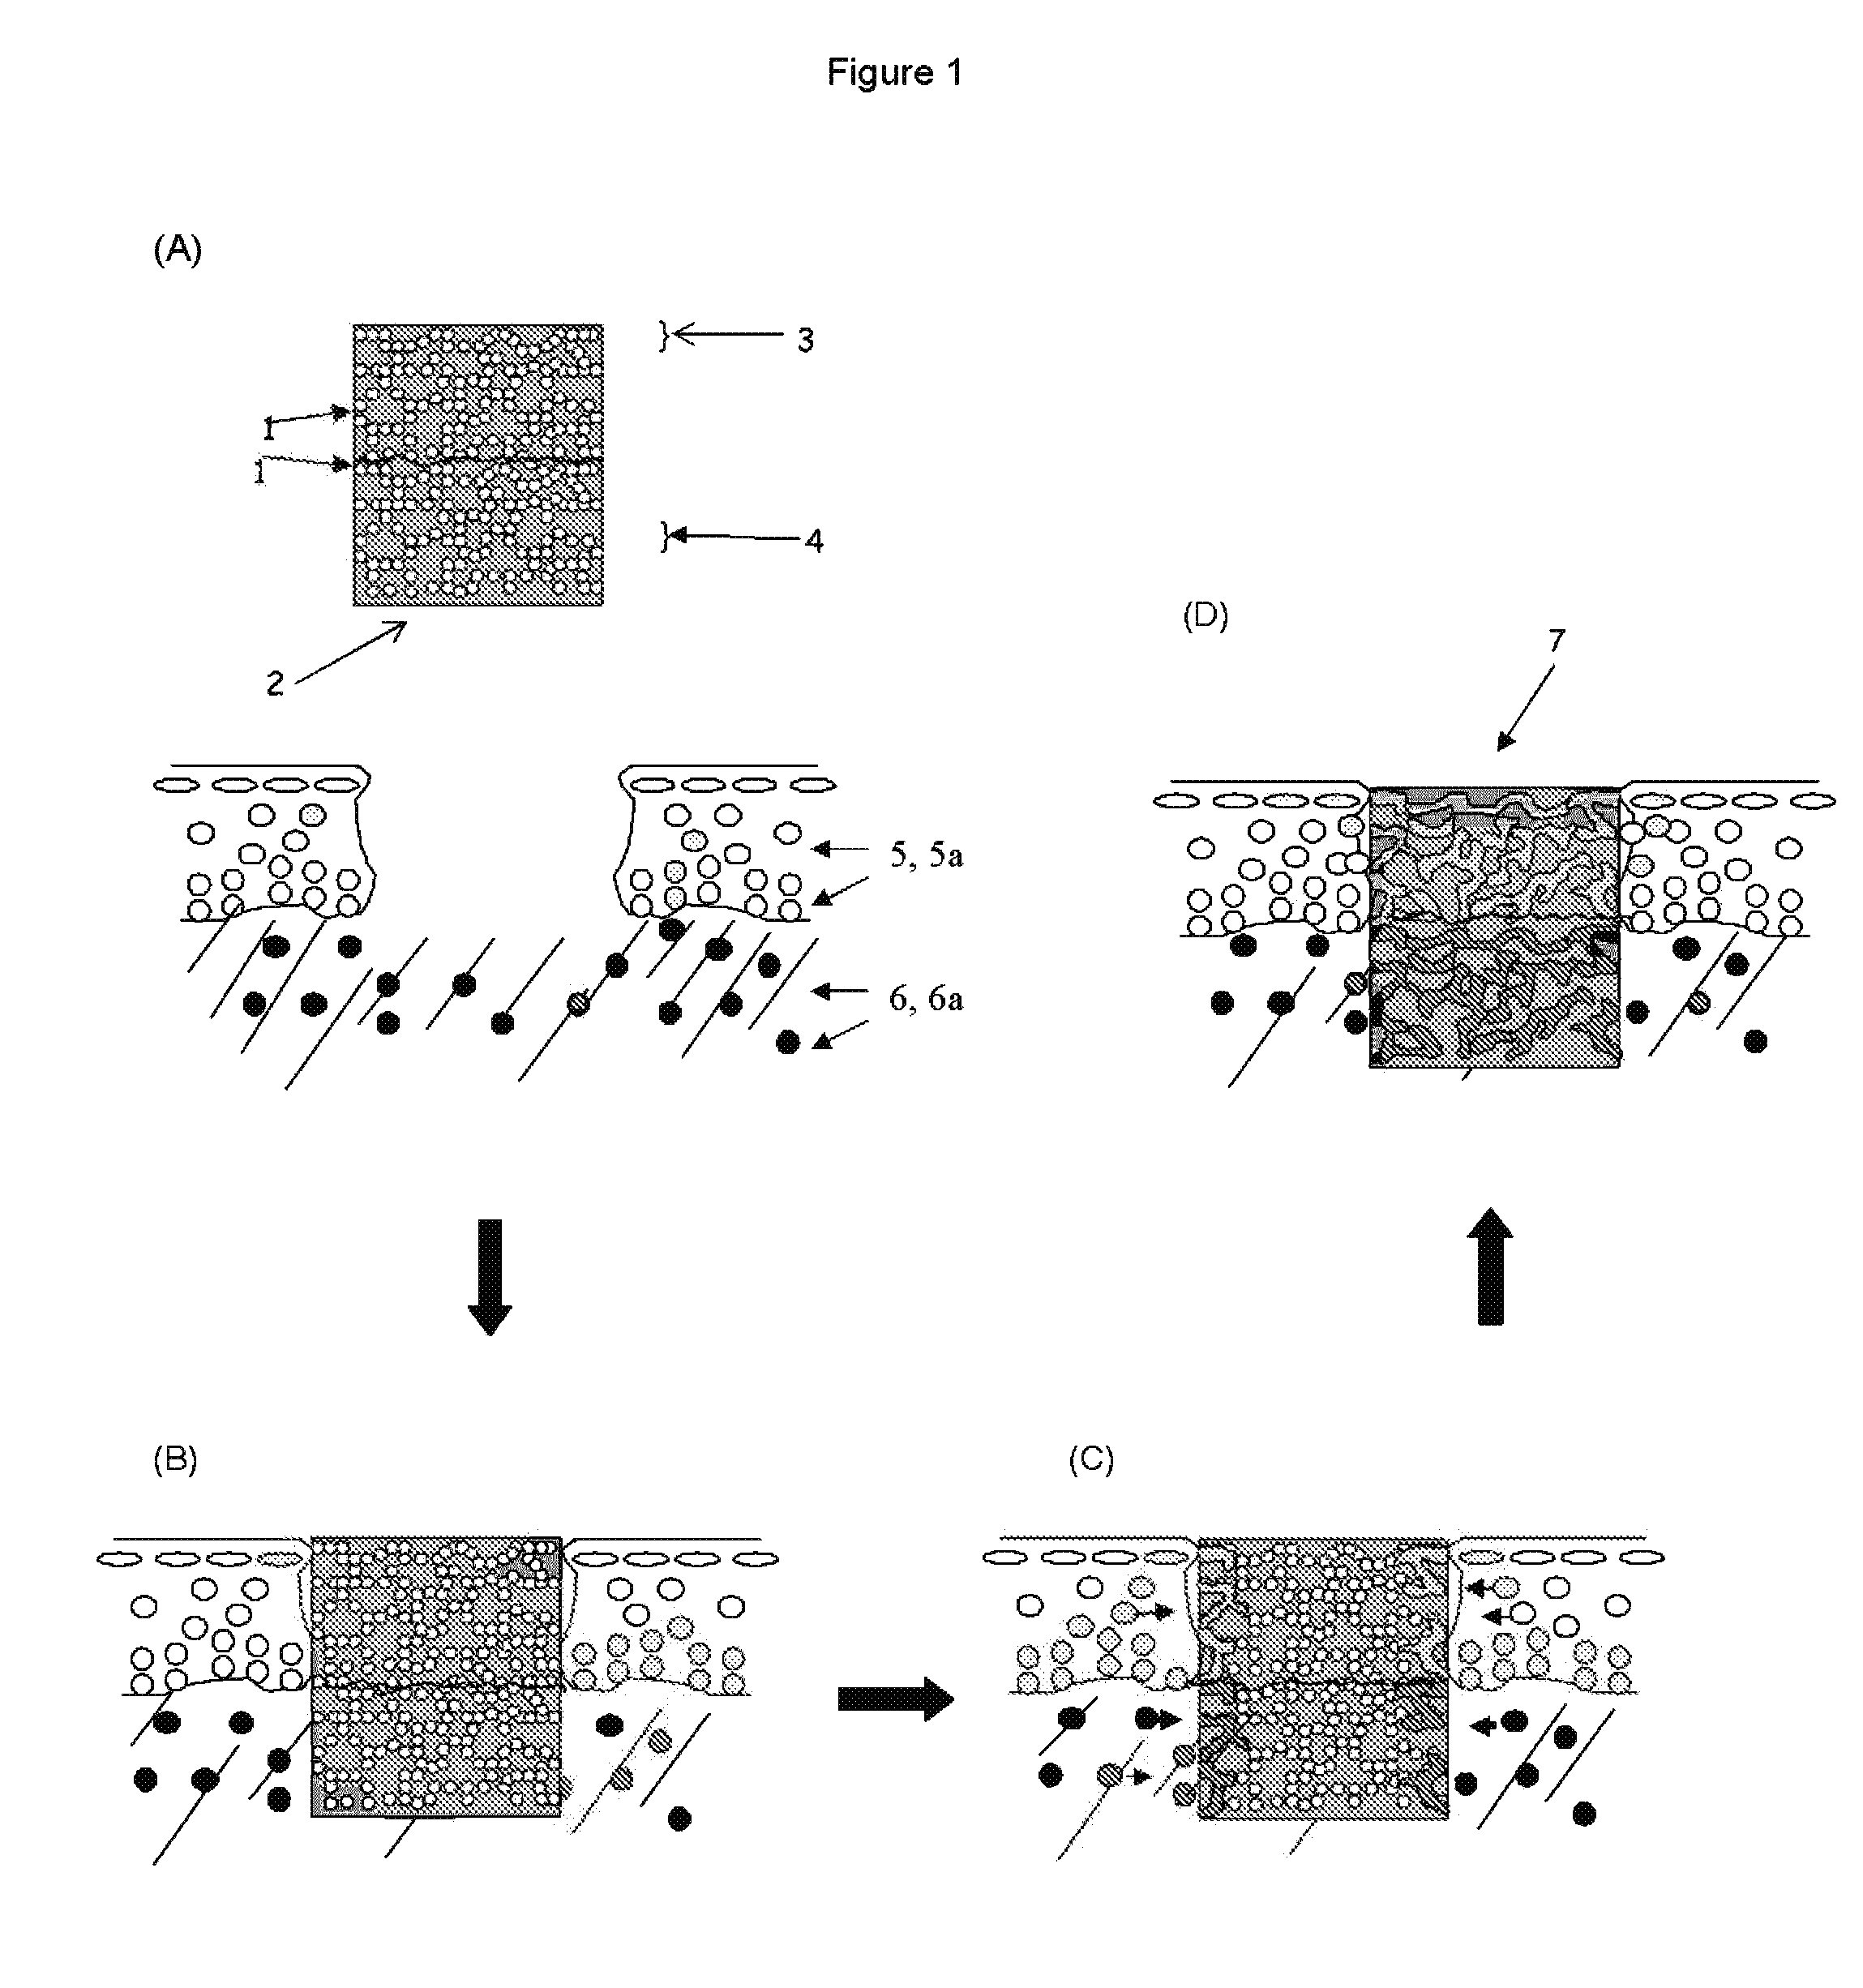 Porous non-biodegradable hydrogel admixed with a chemoattractant for tissue replacement